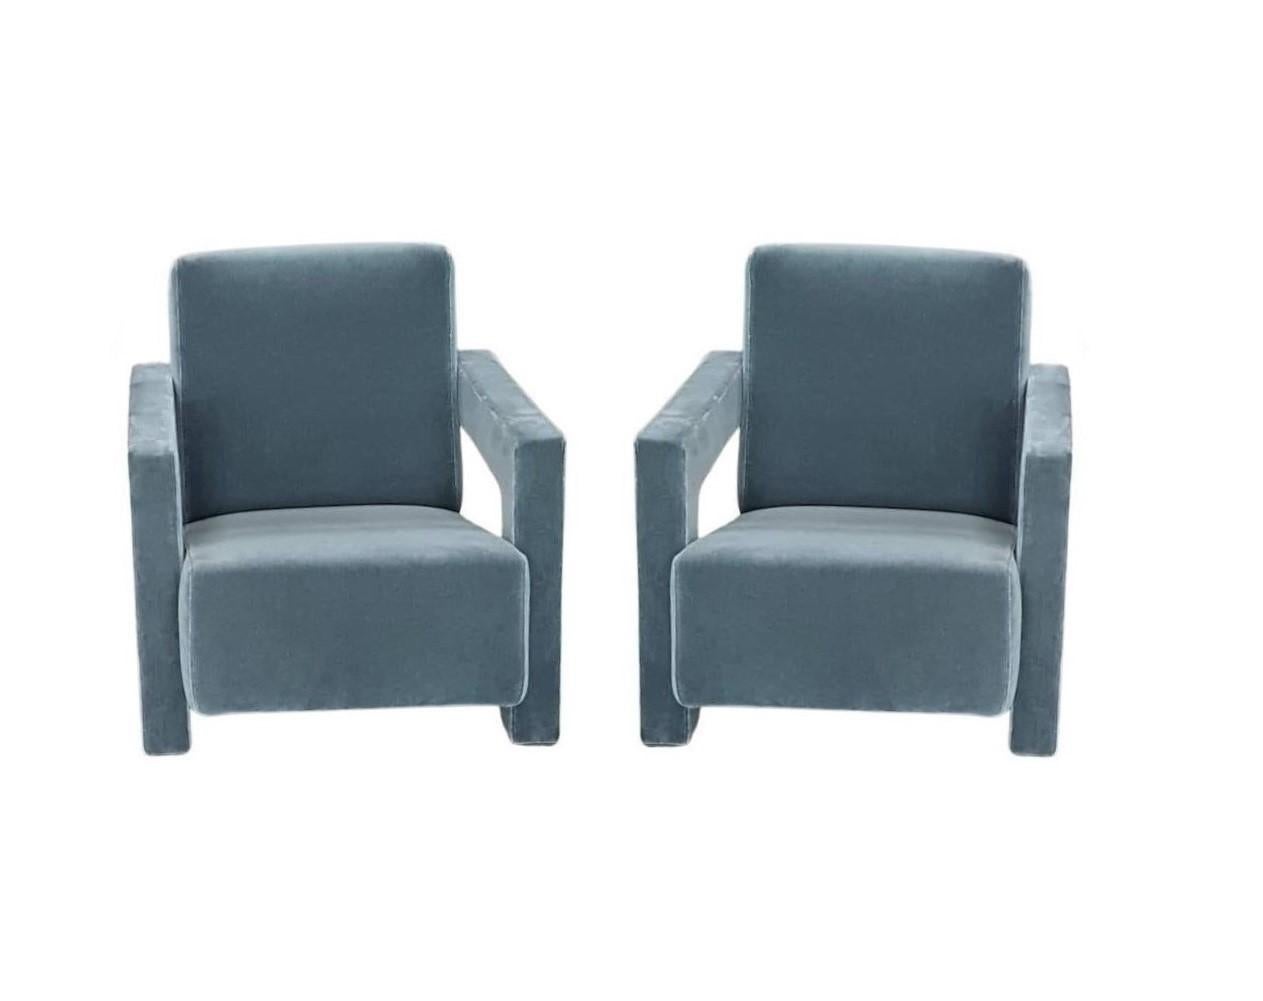 Late 20th Century Pair of 637 Utrecht Armchairs in a Dust Blue Mohair by Rietveld for Cassina